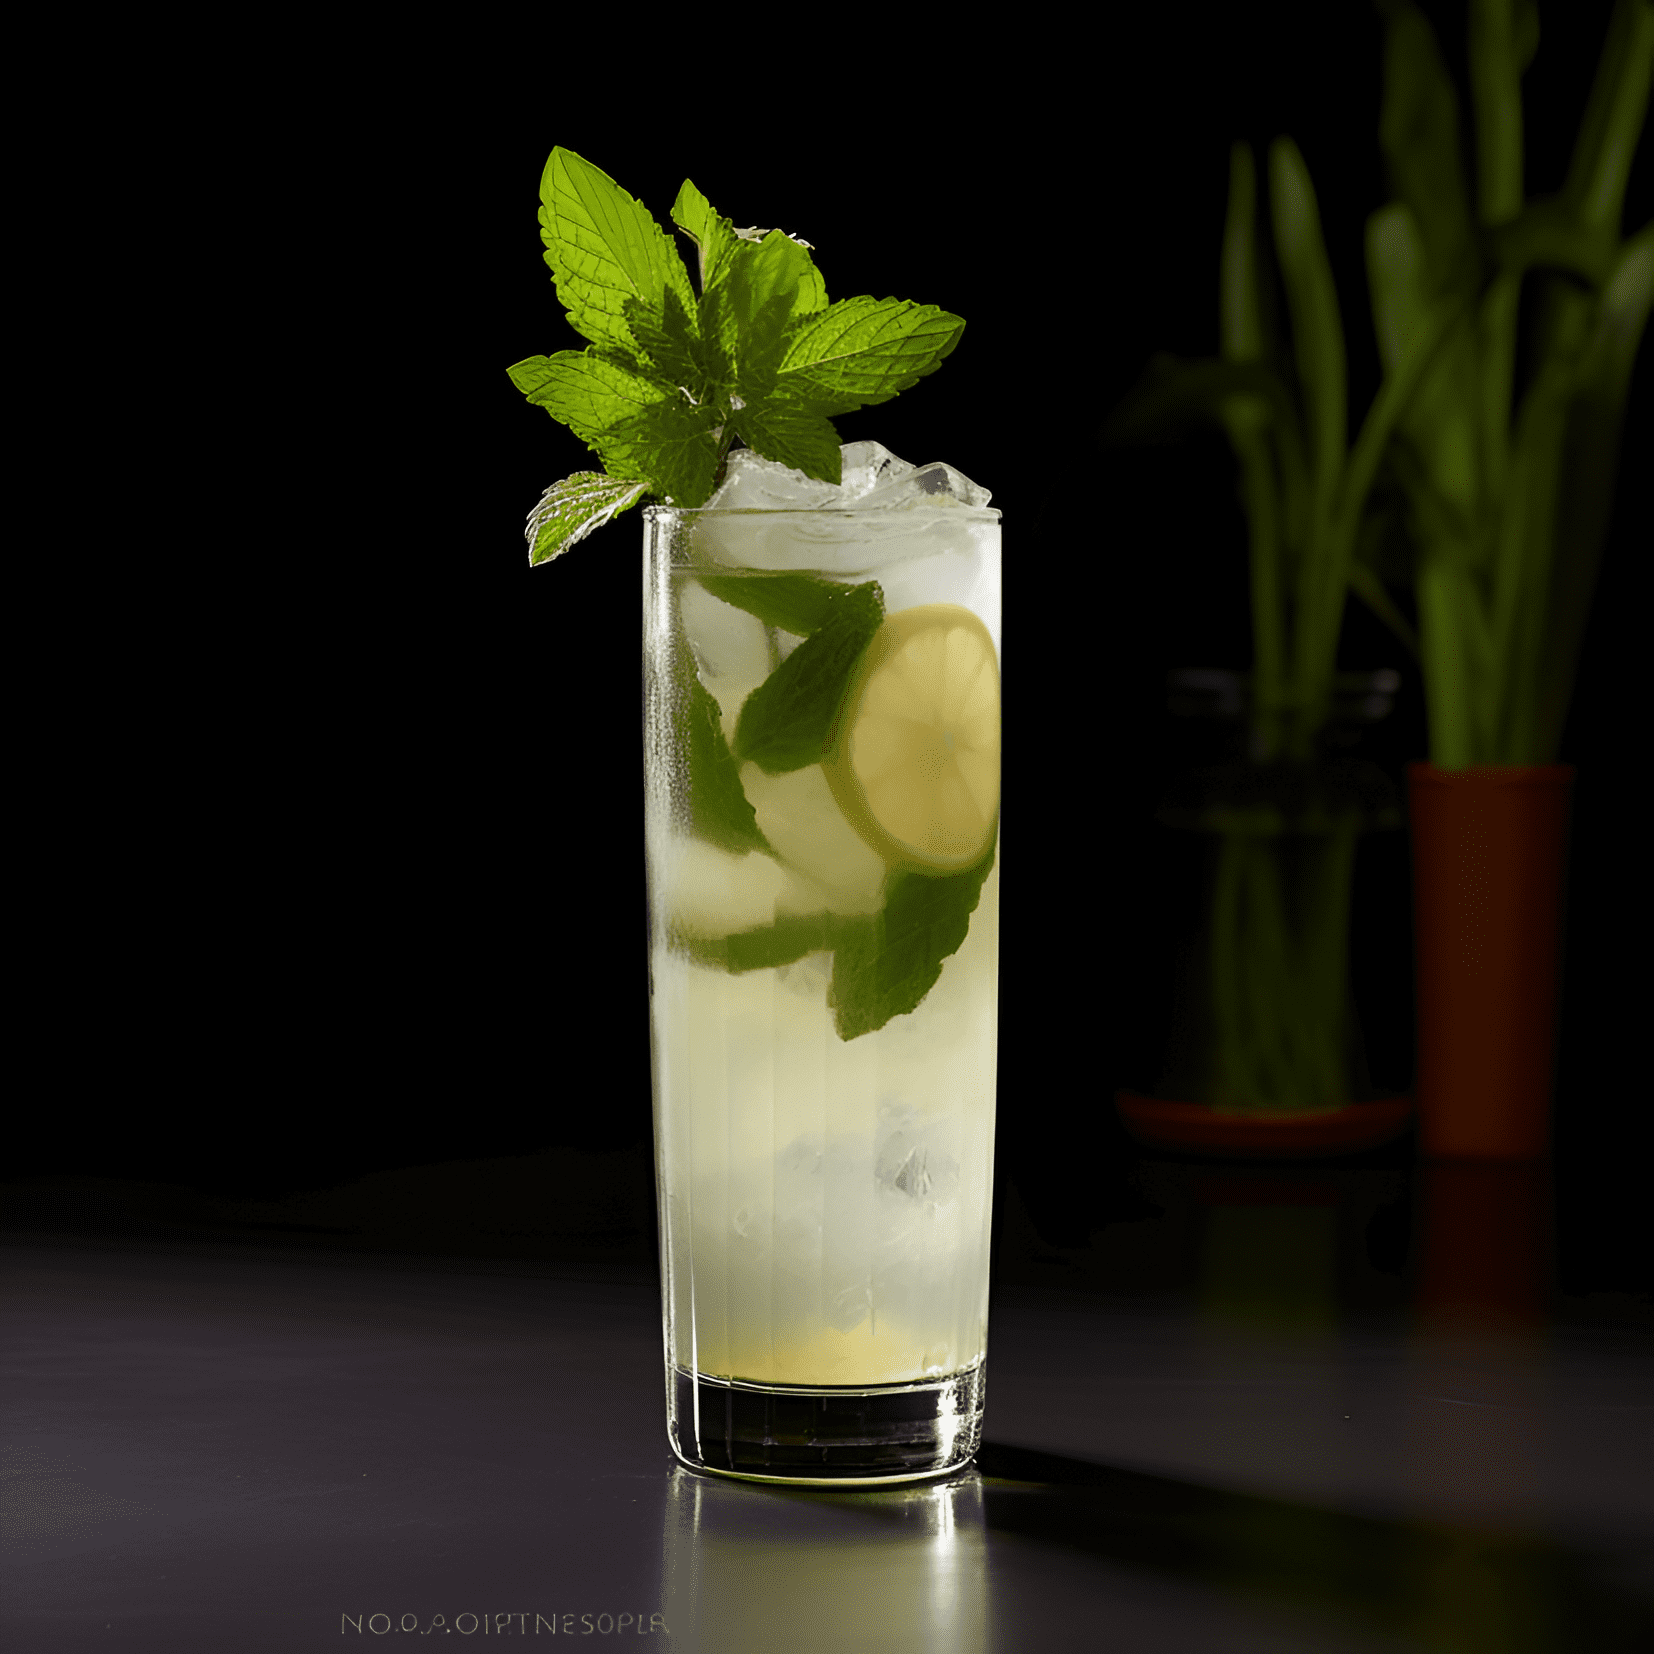 Lakeside Cocktail Recipe - The Lakeside cocktail has a balanced and refreshing taste, with a hint of sweetness from the honey syrup and a subtle tartness from the lemon juice. The gin adds a botanical complexity, while the elderflower liqueur provides a delicate floral note. Overall, the drink is light, crisp, and invigorating.